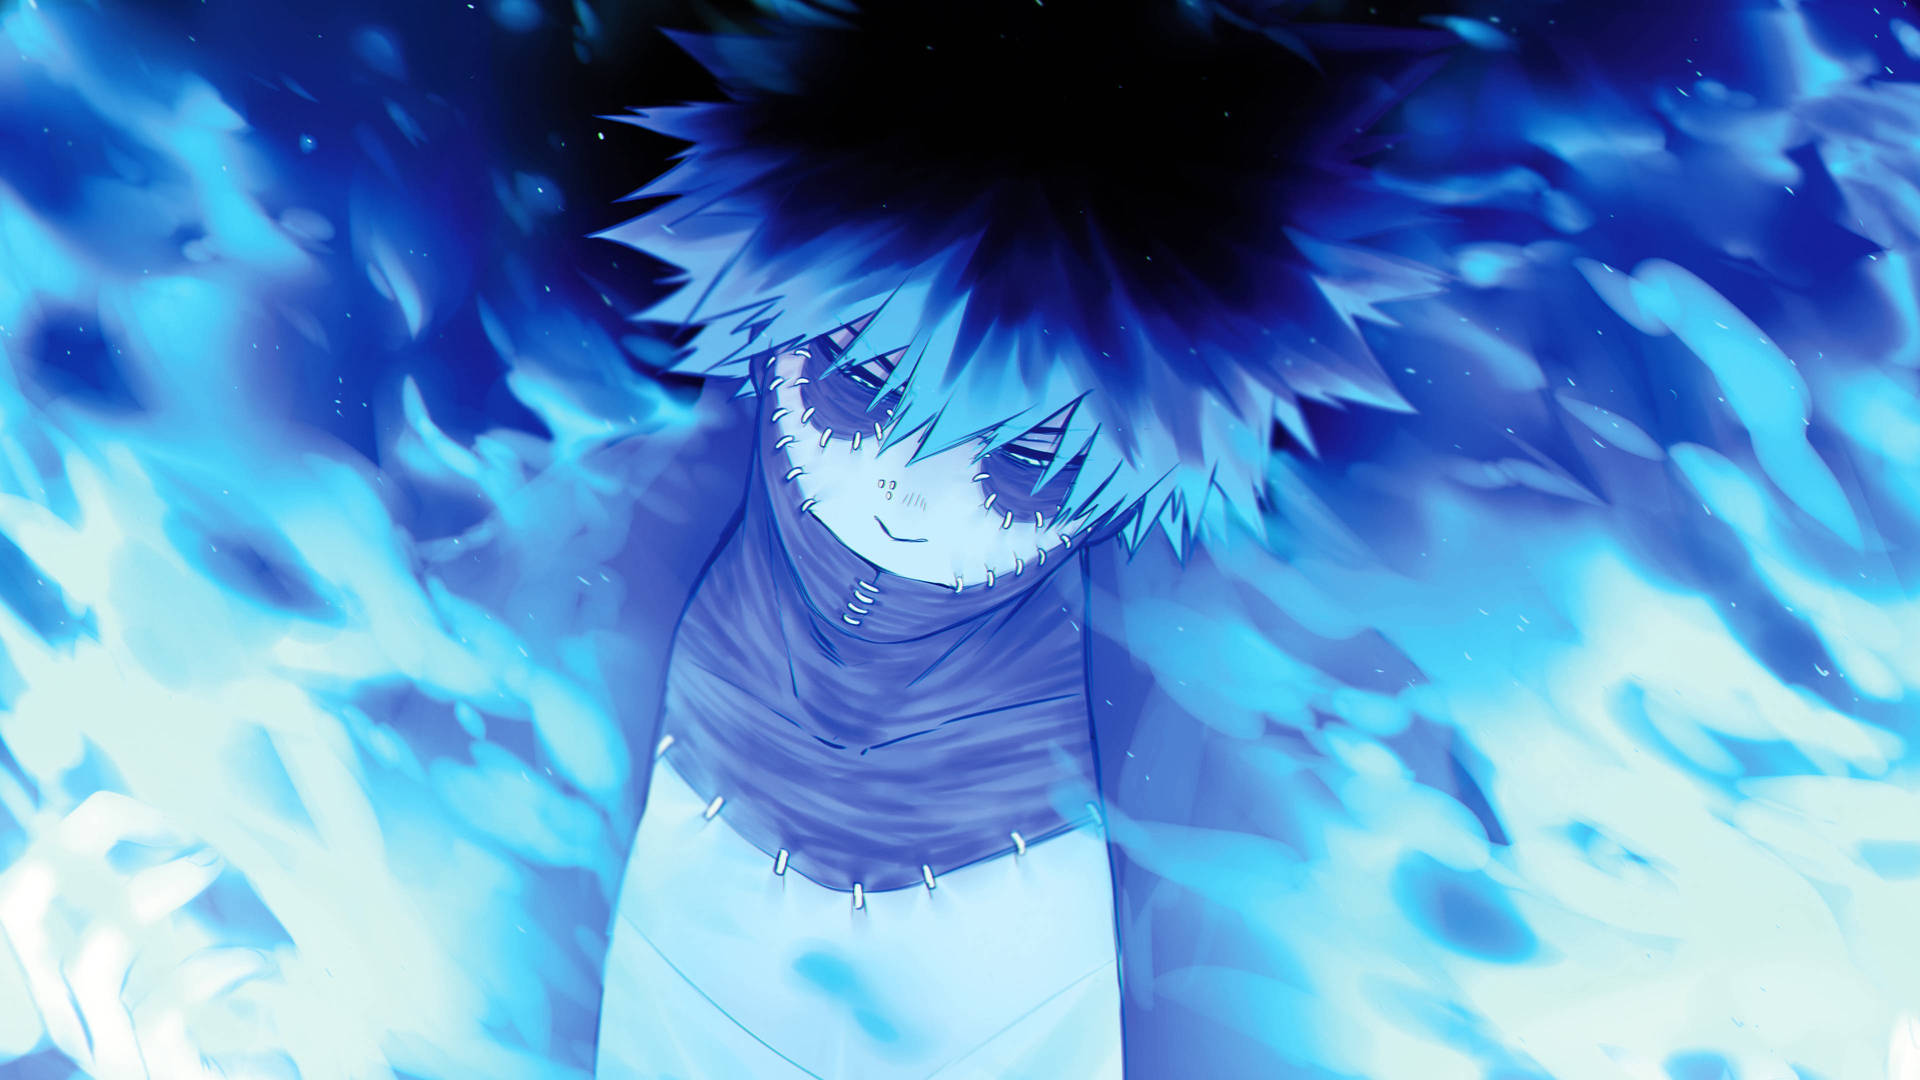 Dabi Standing in the Flames of Change Wallpaper